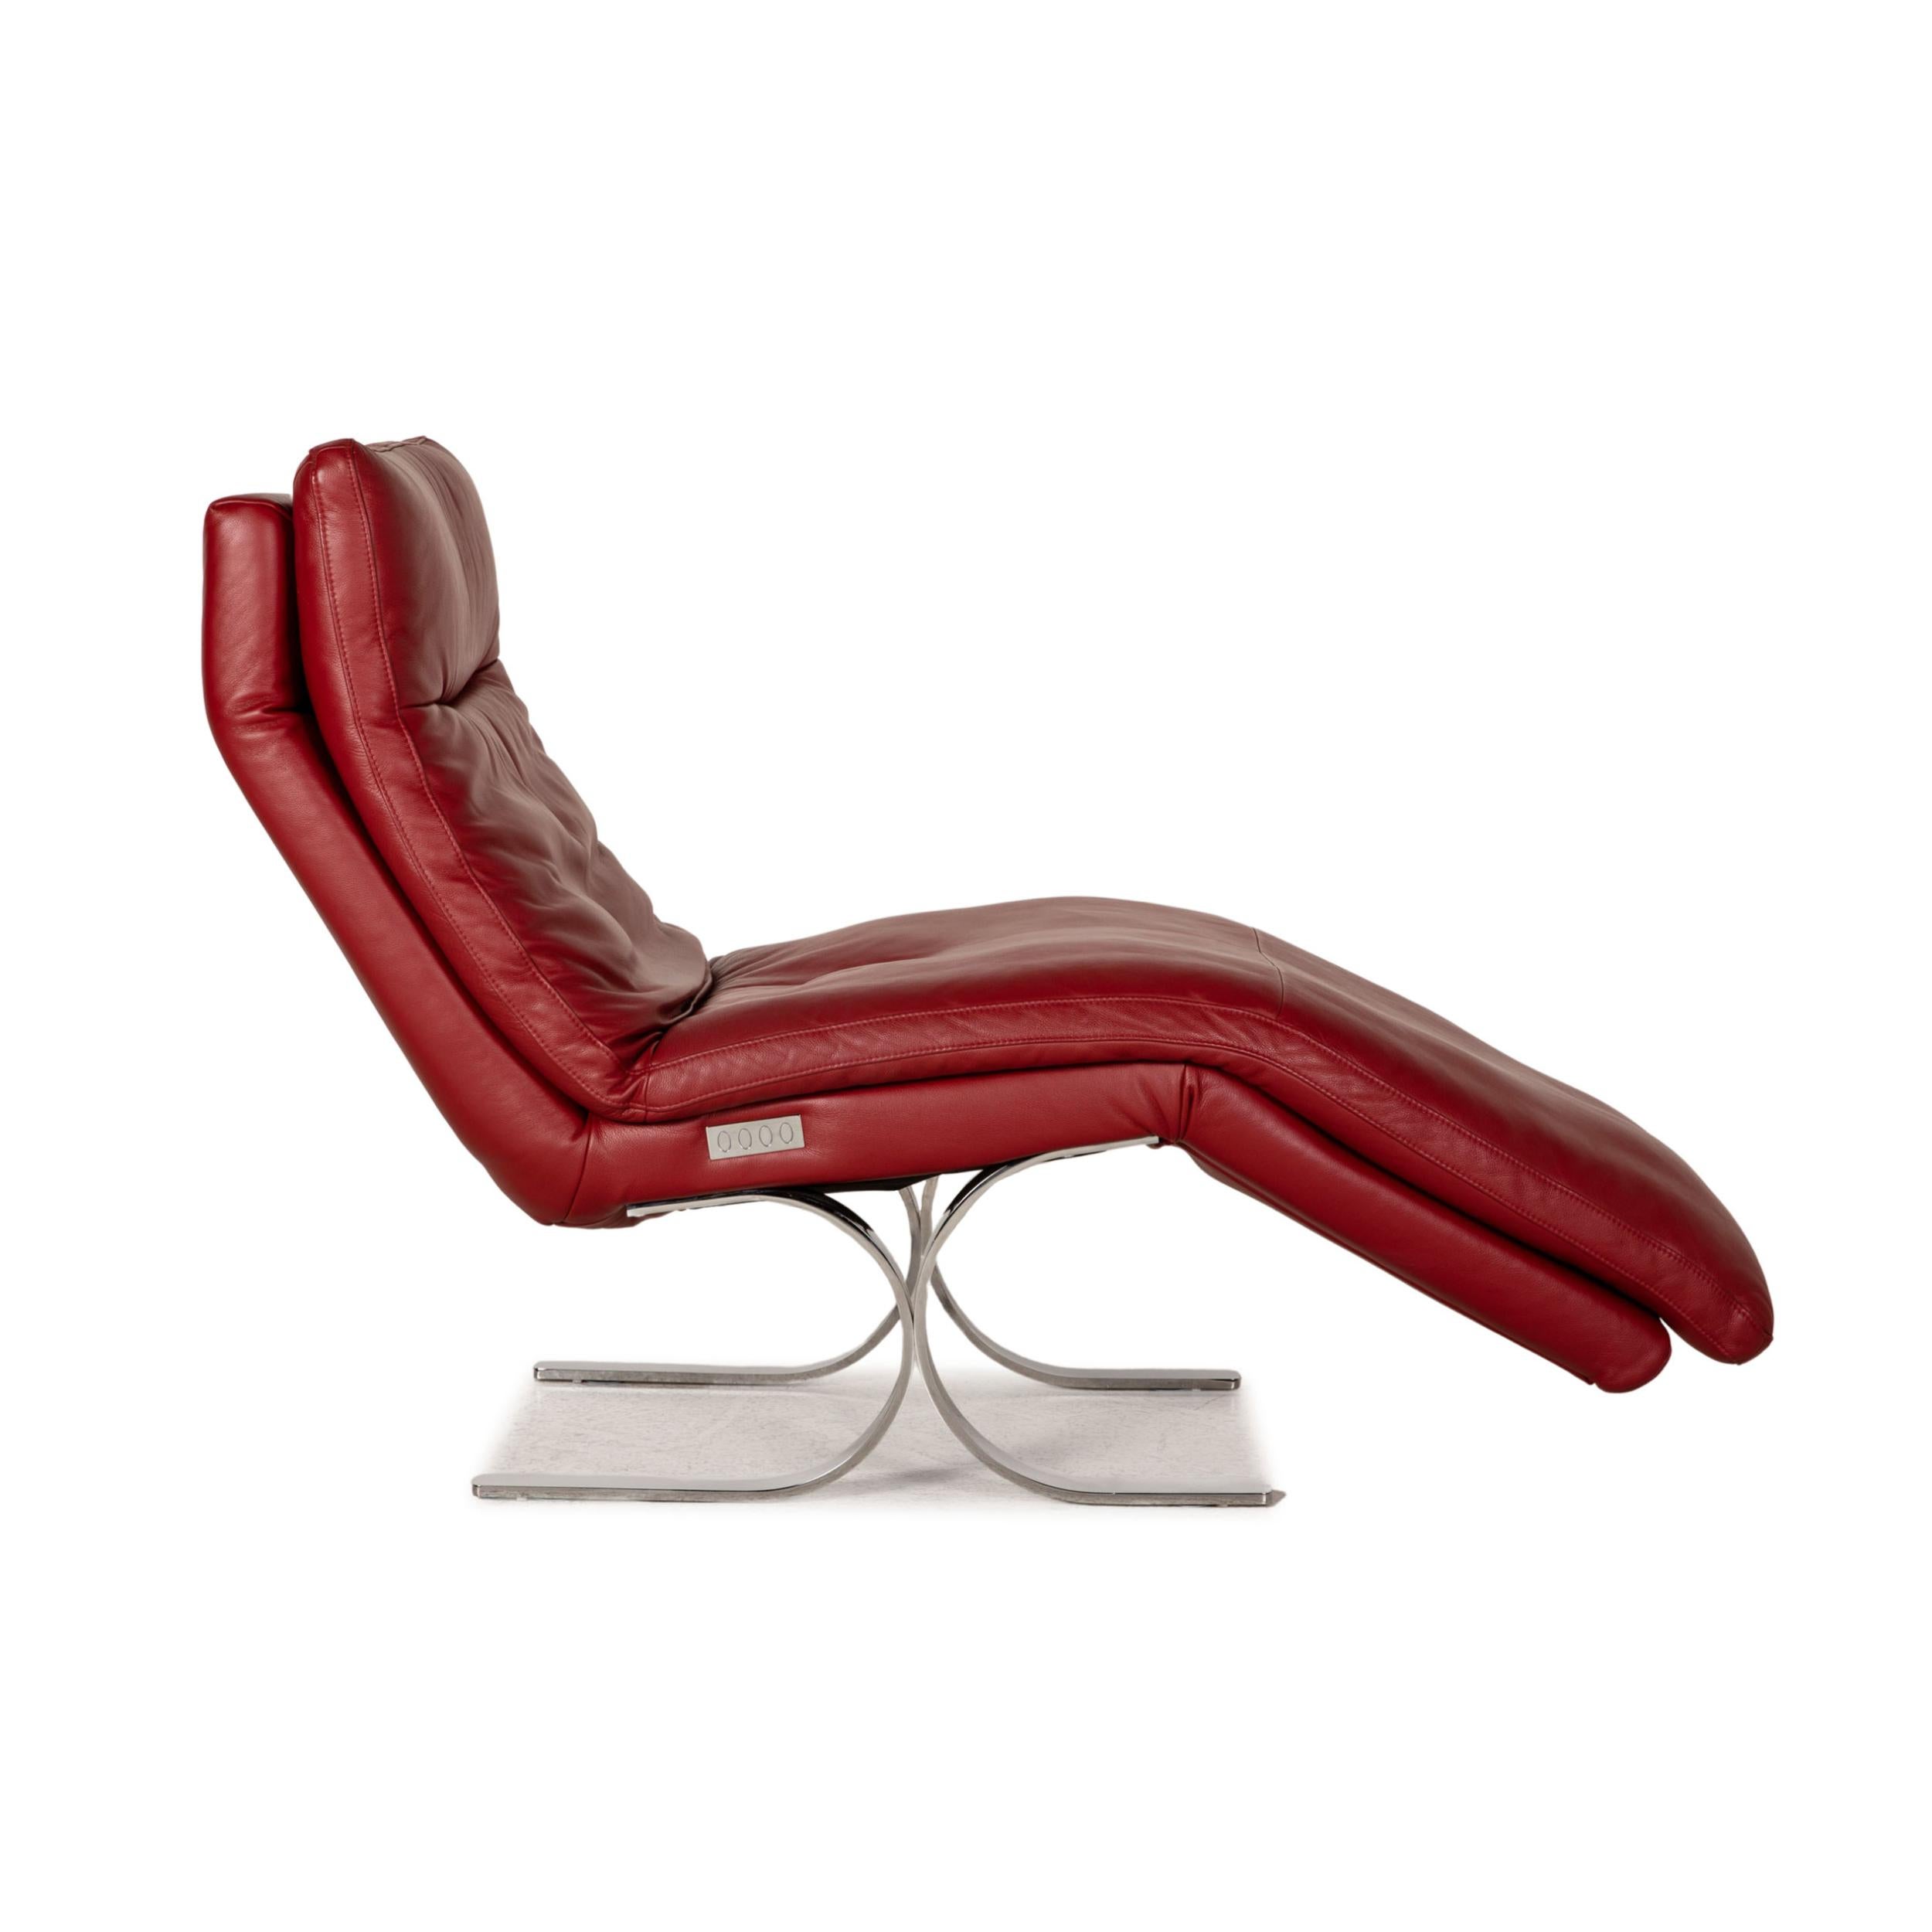 Willi Schillig Daily Dreams Leather Lounger Red Function Relaxation Function For Sale 2